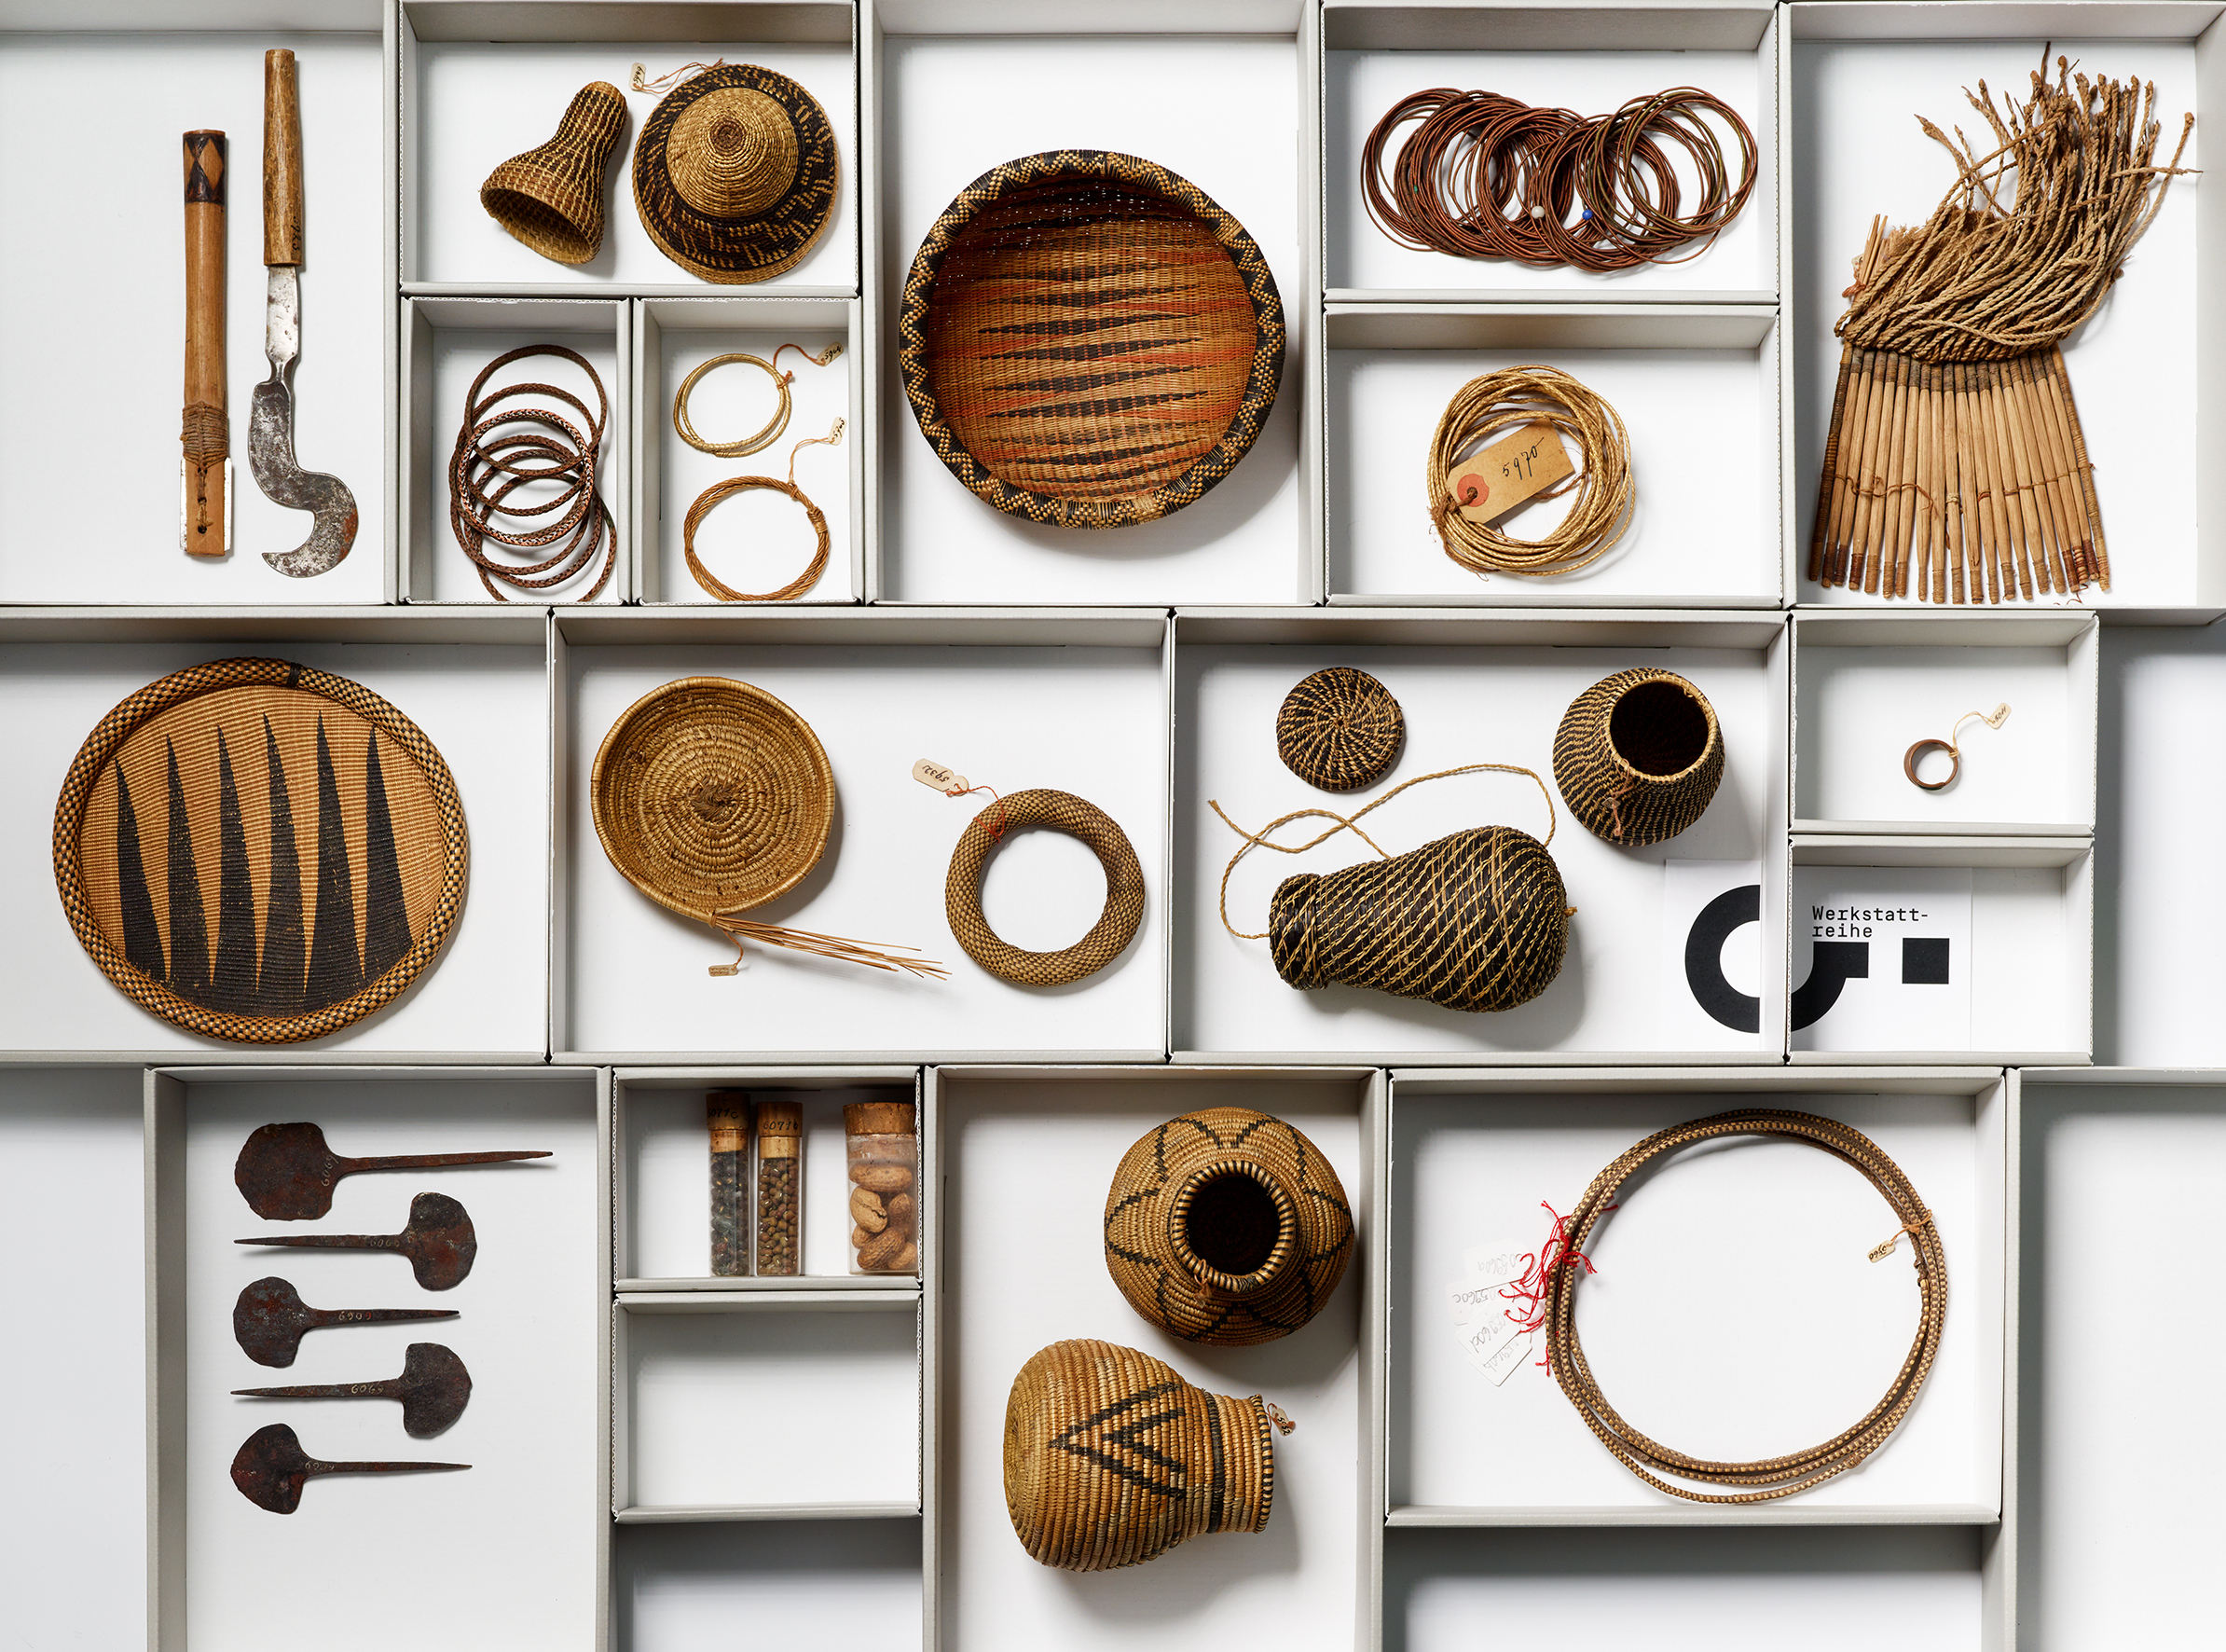 Objects from the Paasche Collection at the Ethnographic Museum of the University of Zurich.